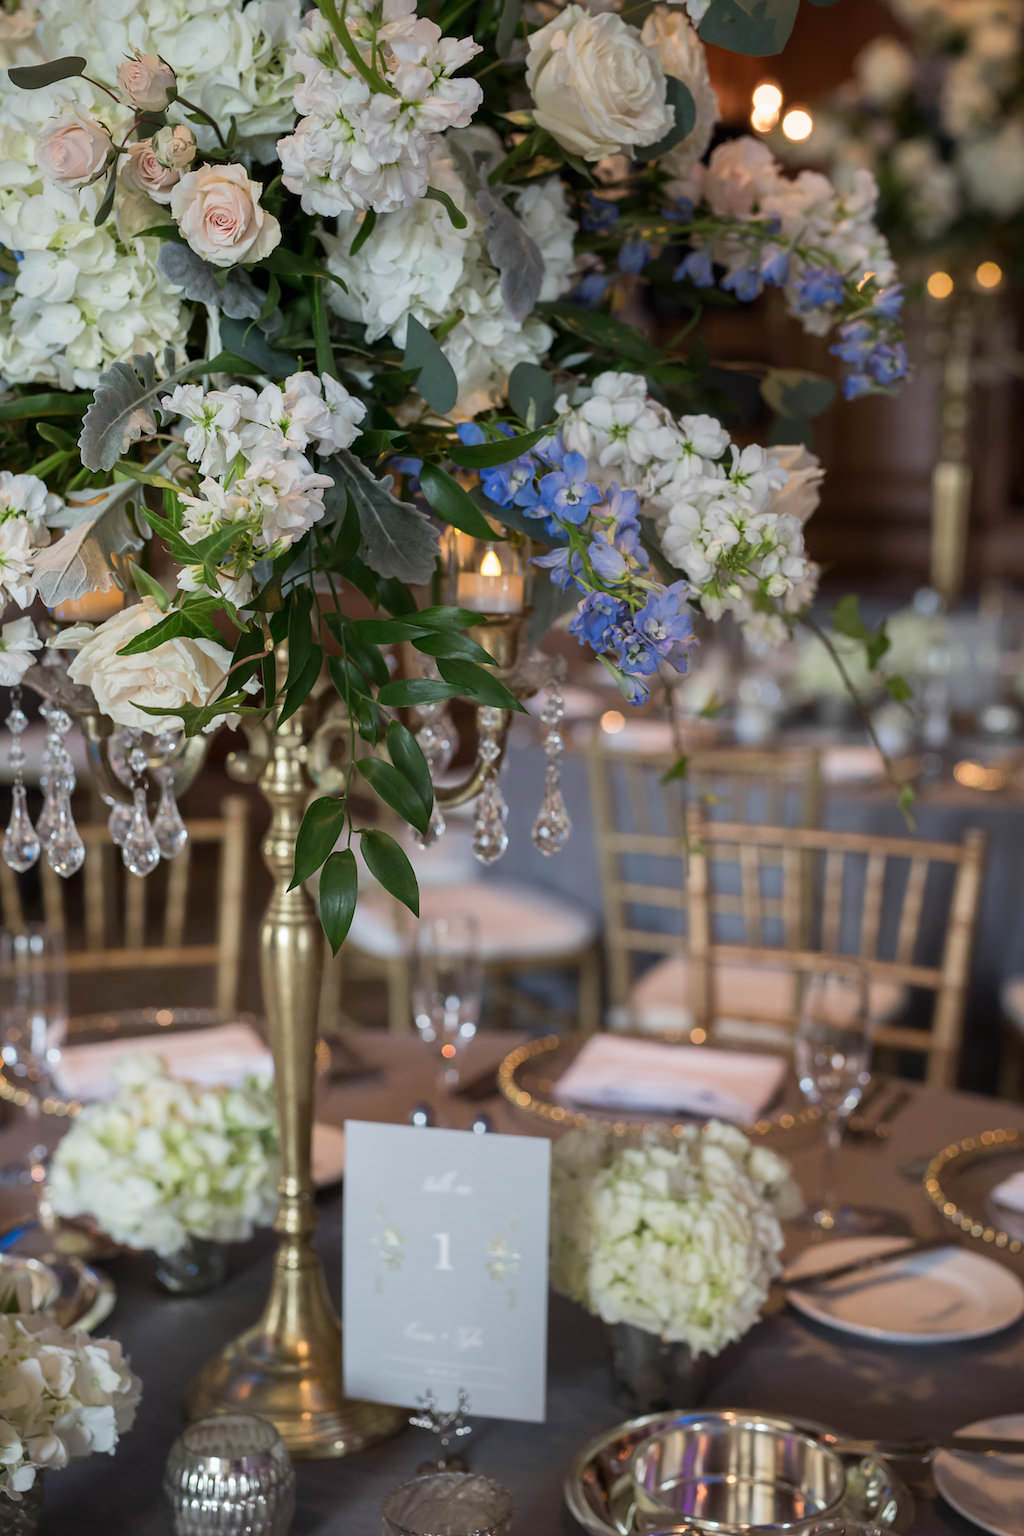 Elegant Wedding Reception Table with Tall White, Blush and Blue Floral with Greenery and Crystals Centerpiecee in Gold Candelabra, with Small Hydrangea Flowers, Gray Printed Table Number and Silk Linen, and Gold Chiavari Chairs